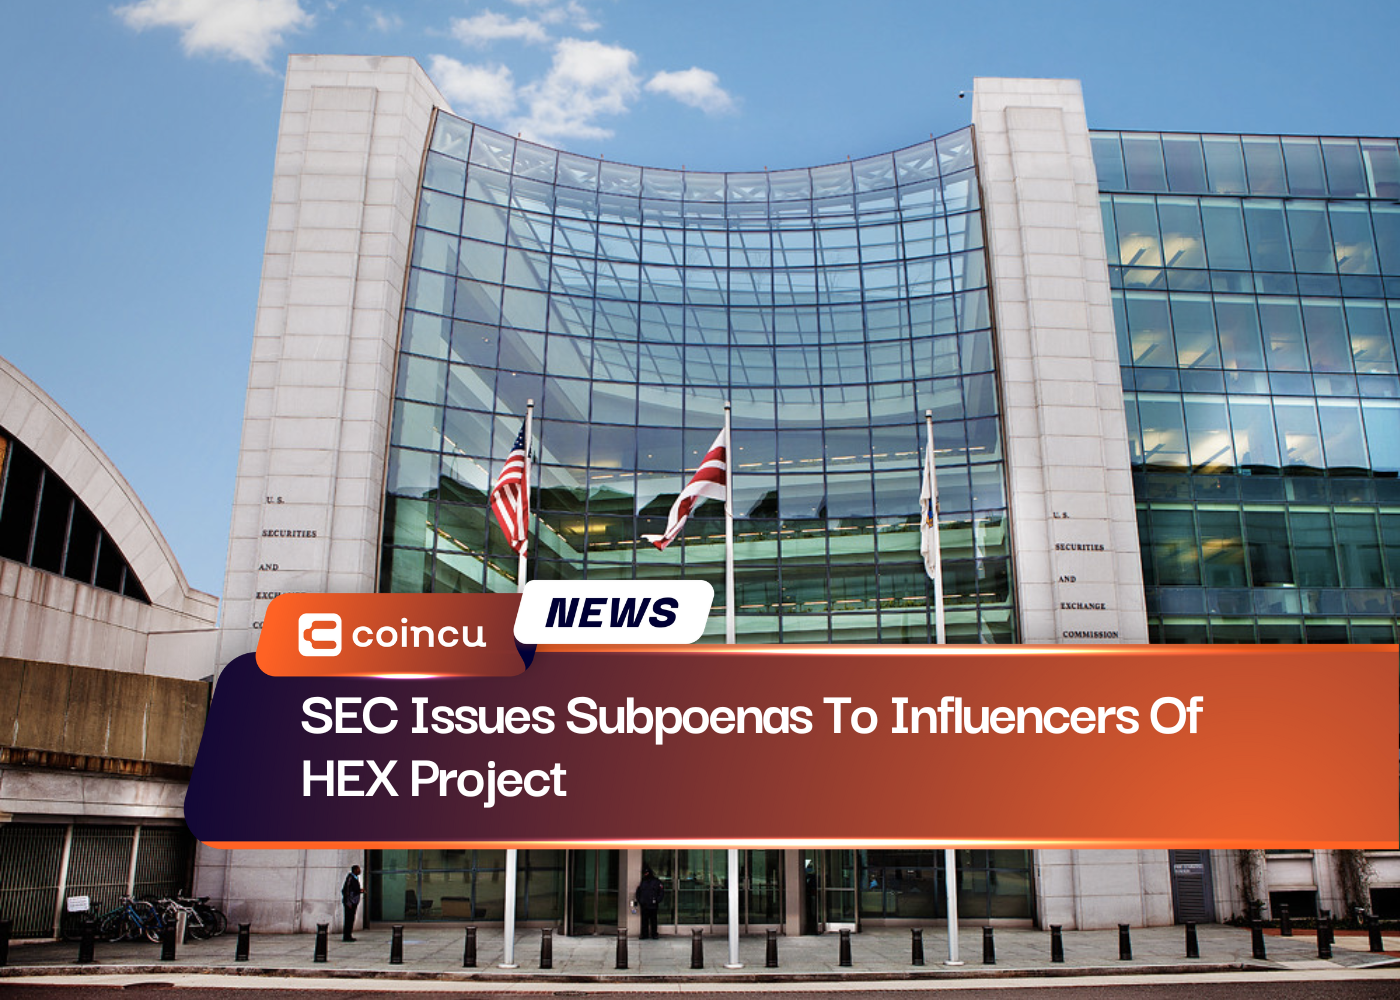 SEC Issues Subpoenas To Influencers Of HEX Project